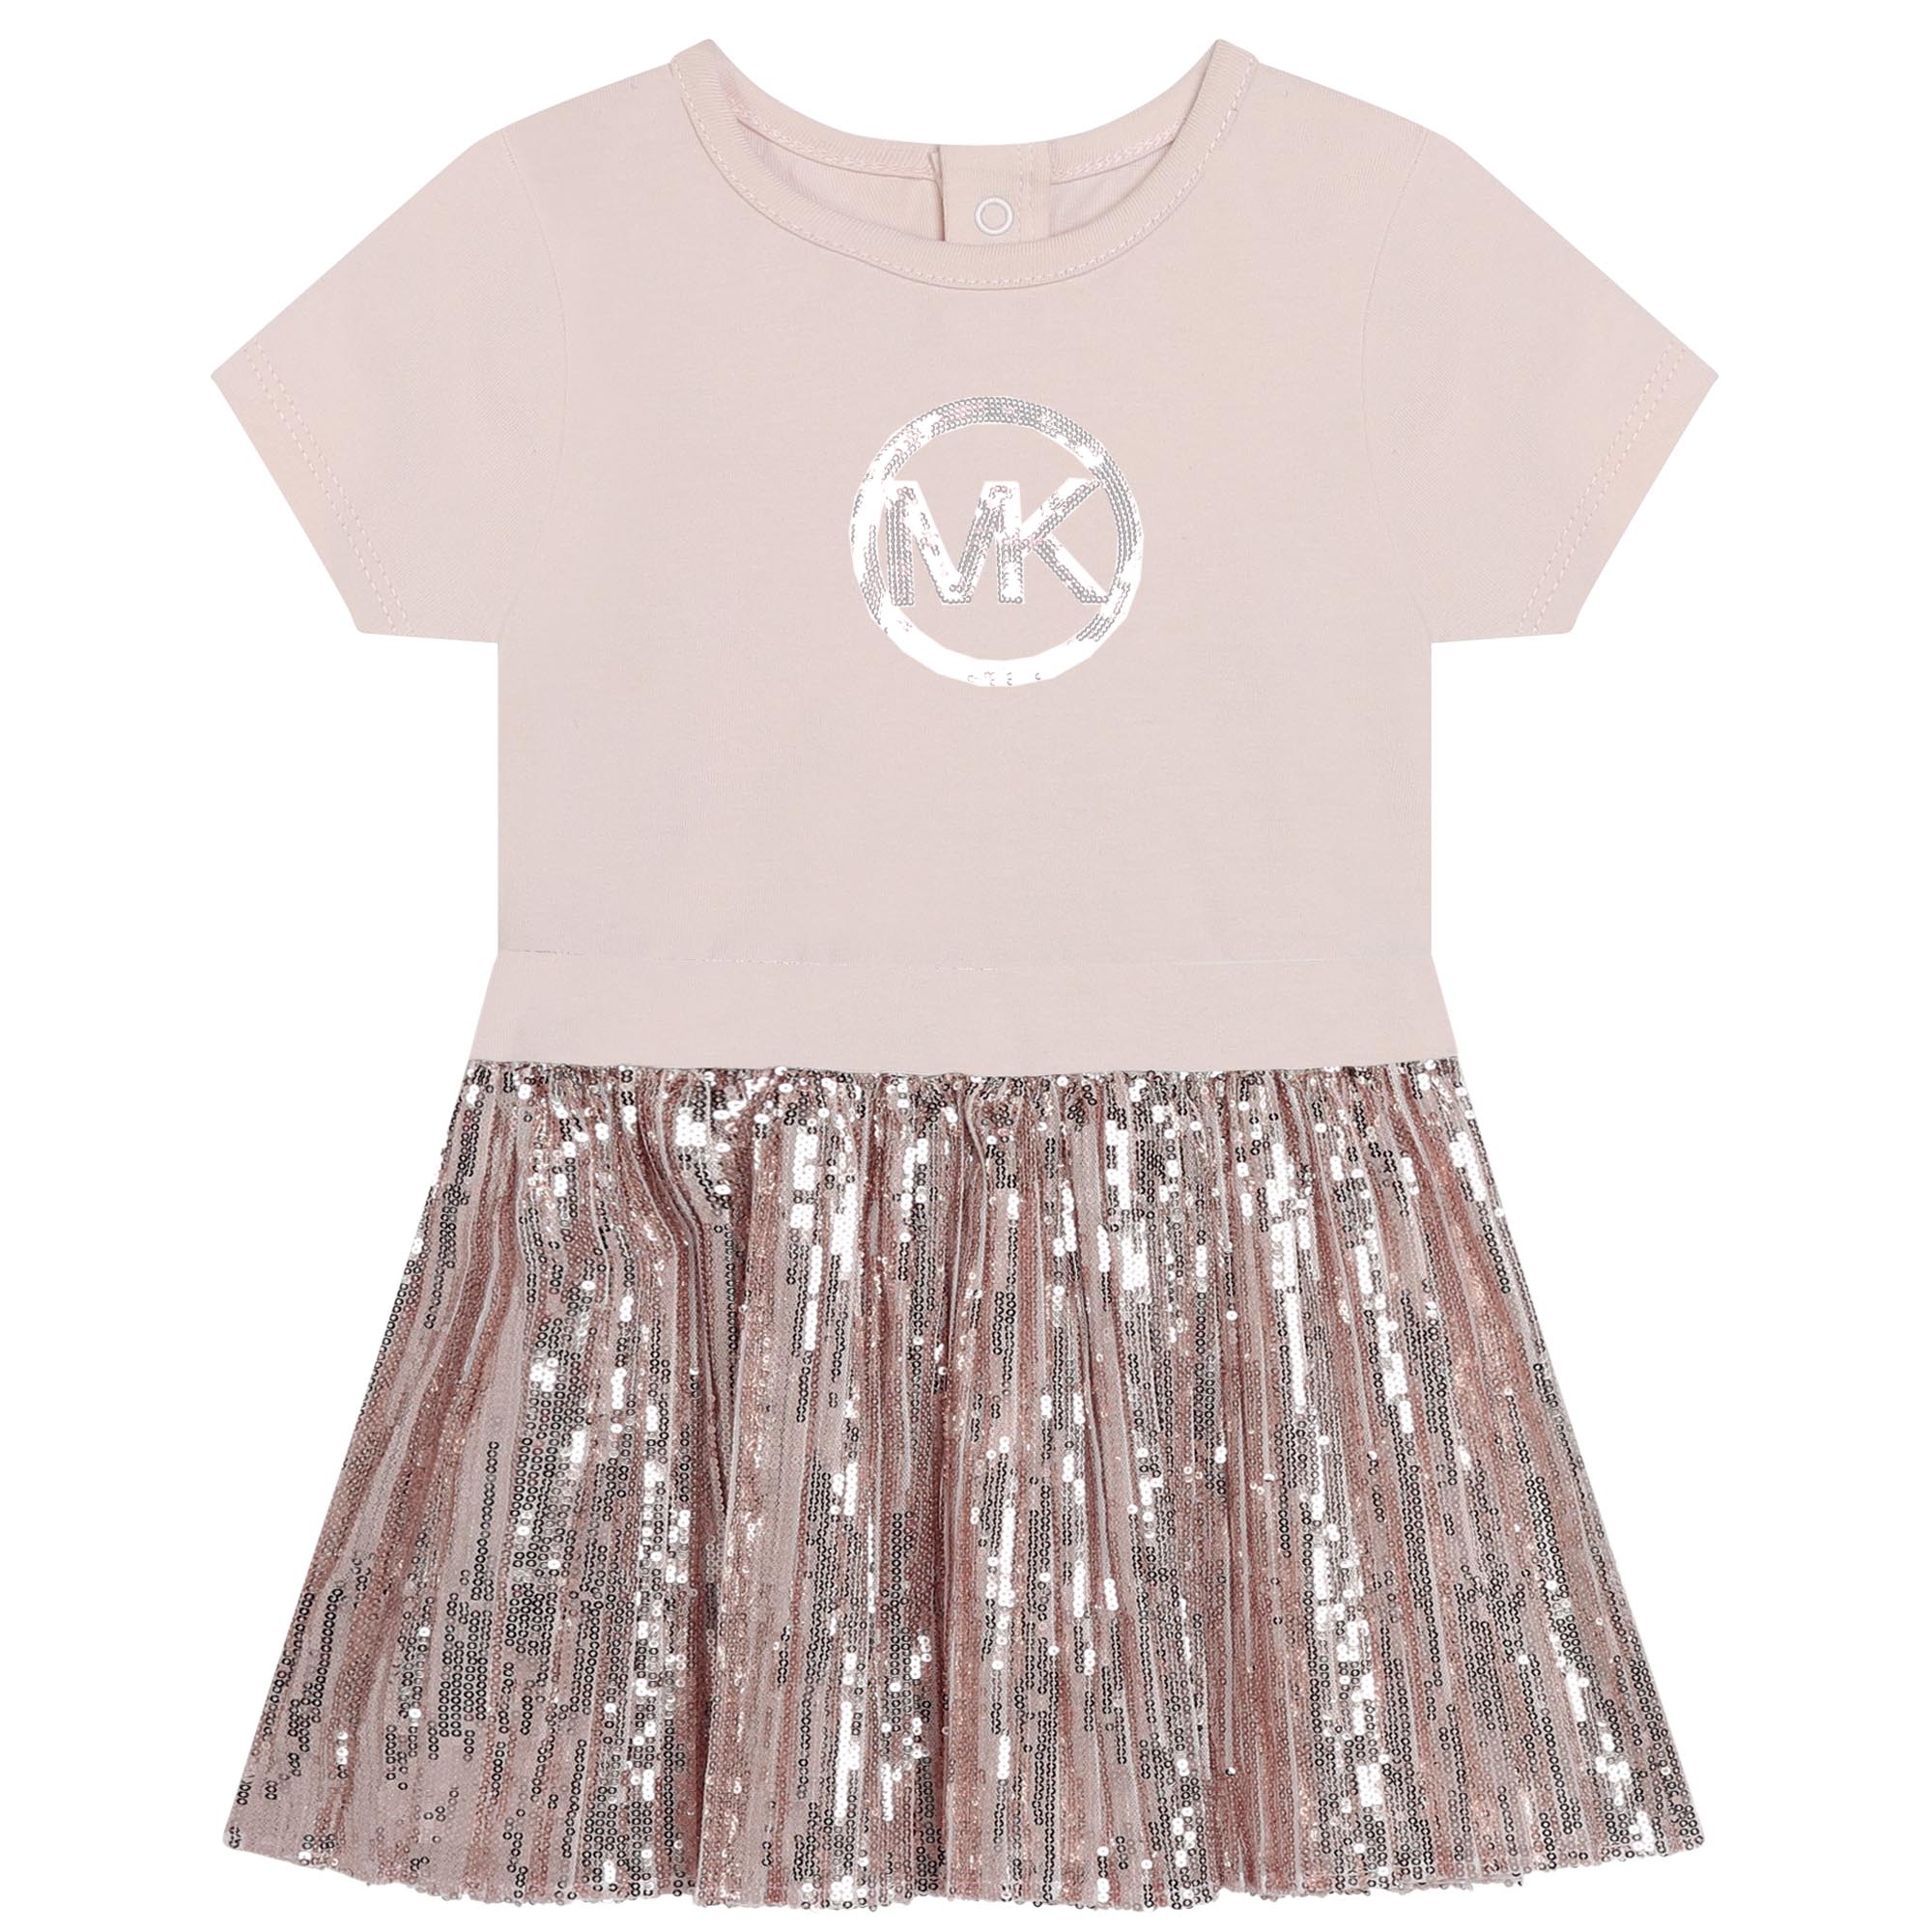 Decorative two-material dress MICHAEL KORS for GIRL